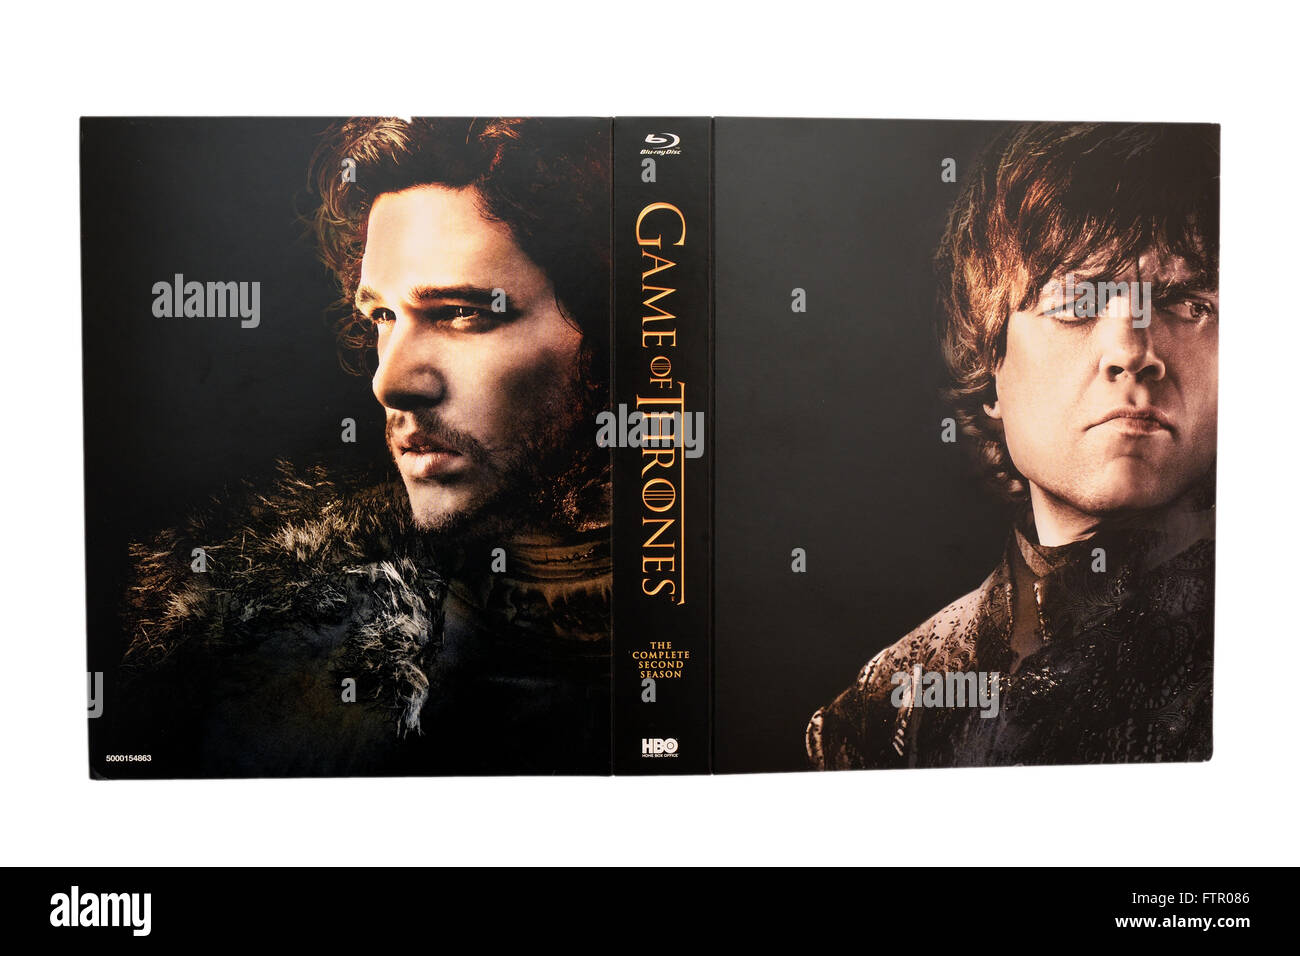 BARCELONA, SPAIN - DEC 27, 2014: Game of Thrones, television series c, on Blu-Ray, with Tyrion Lannister (Peter Dinklage). Stock Photo